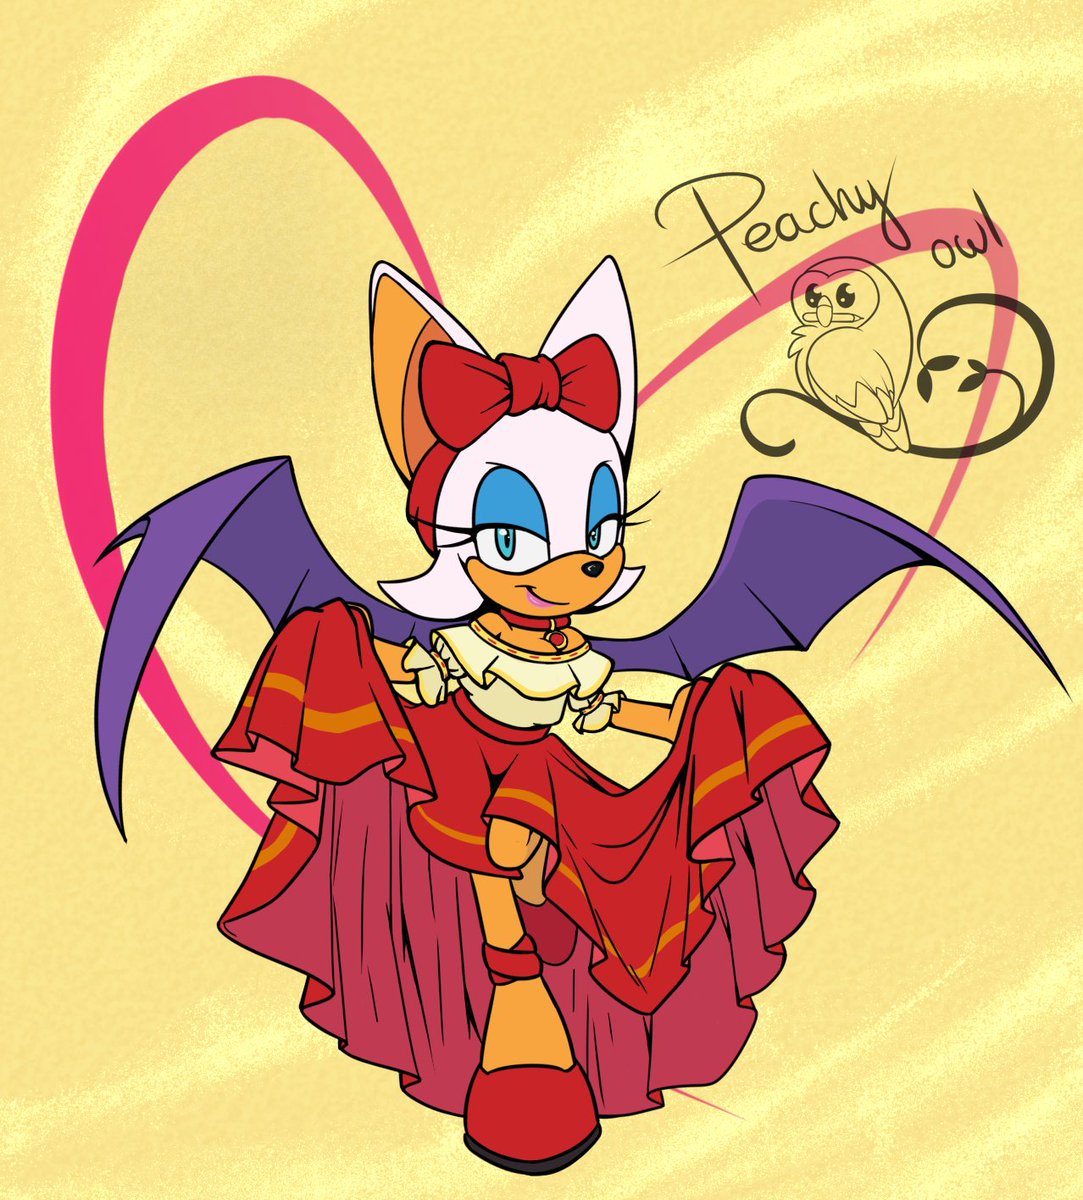 Peachy Owl on X: Have a wholesome SonAmy wedding! This one